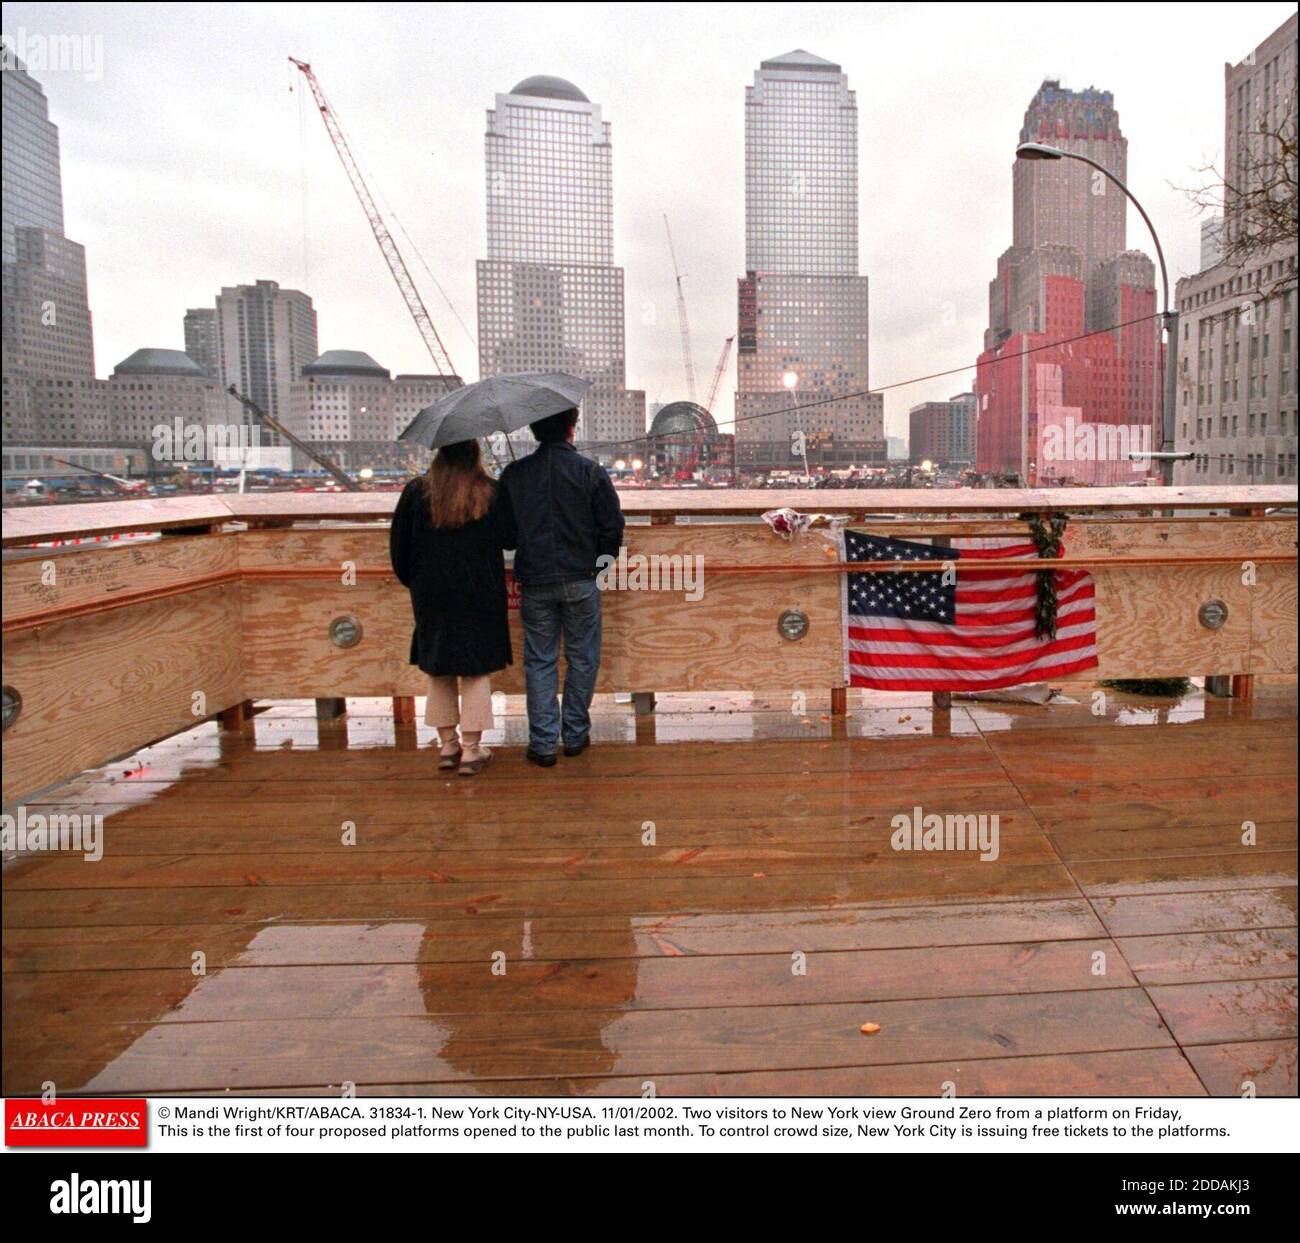 NO FILM, NO VIDEO, NO TV, NO DOCUMENTARY - © Mandi Wright/KRT/ABACA. 31834-1. New York City-NY-USA. 11/01/2002. Two visitors to New York view Ground Zero from a platform on Friday, January 11, 2002 This is the first of four proposed platforms opened to the public last month. To control crowd size, Stock Photo